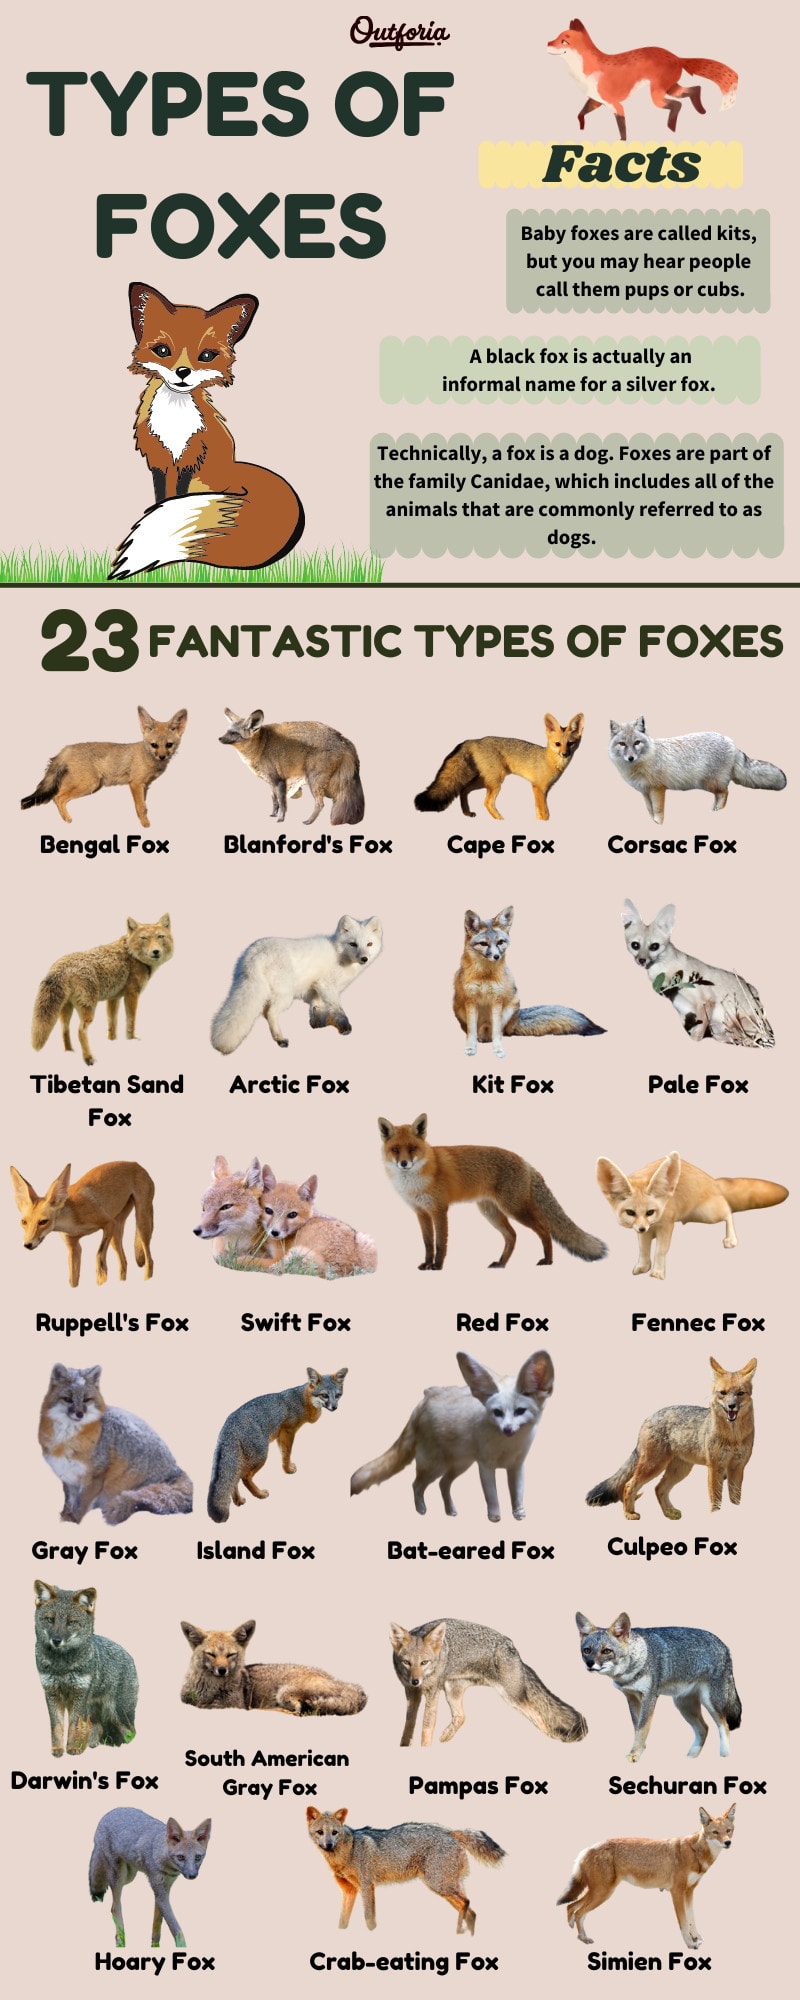 Types of Foxes Infograpic